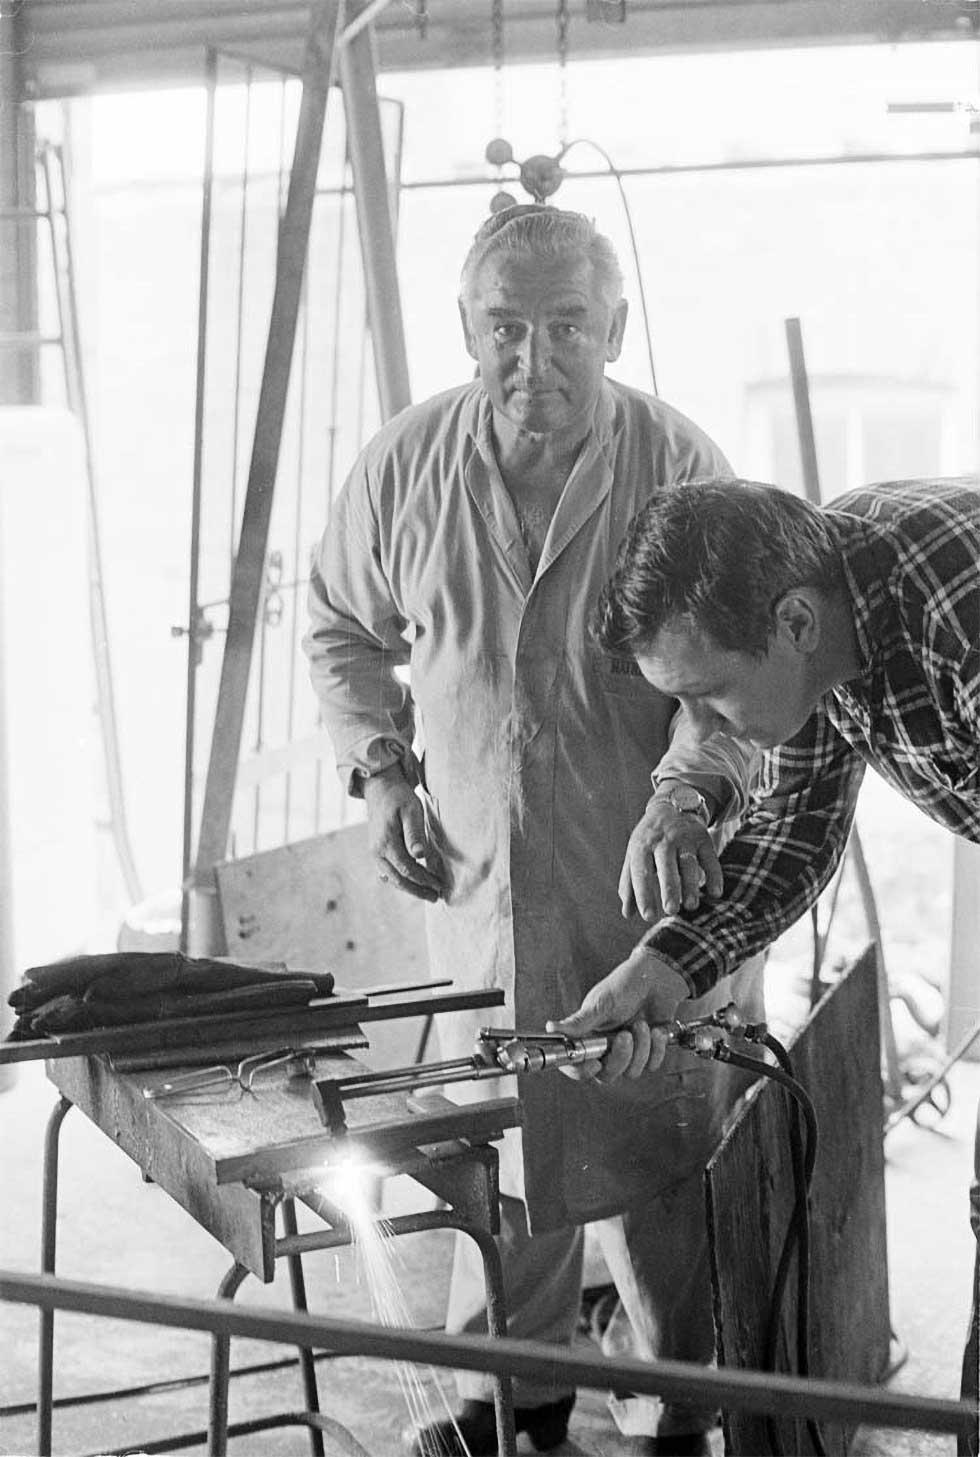 A man teaching another man to weld.